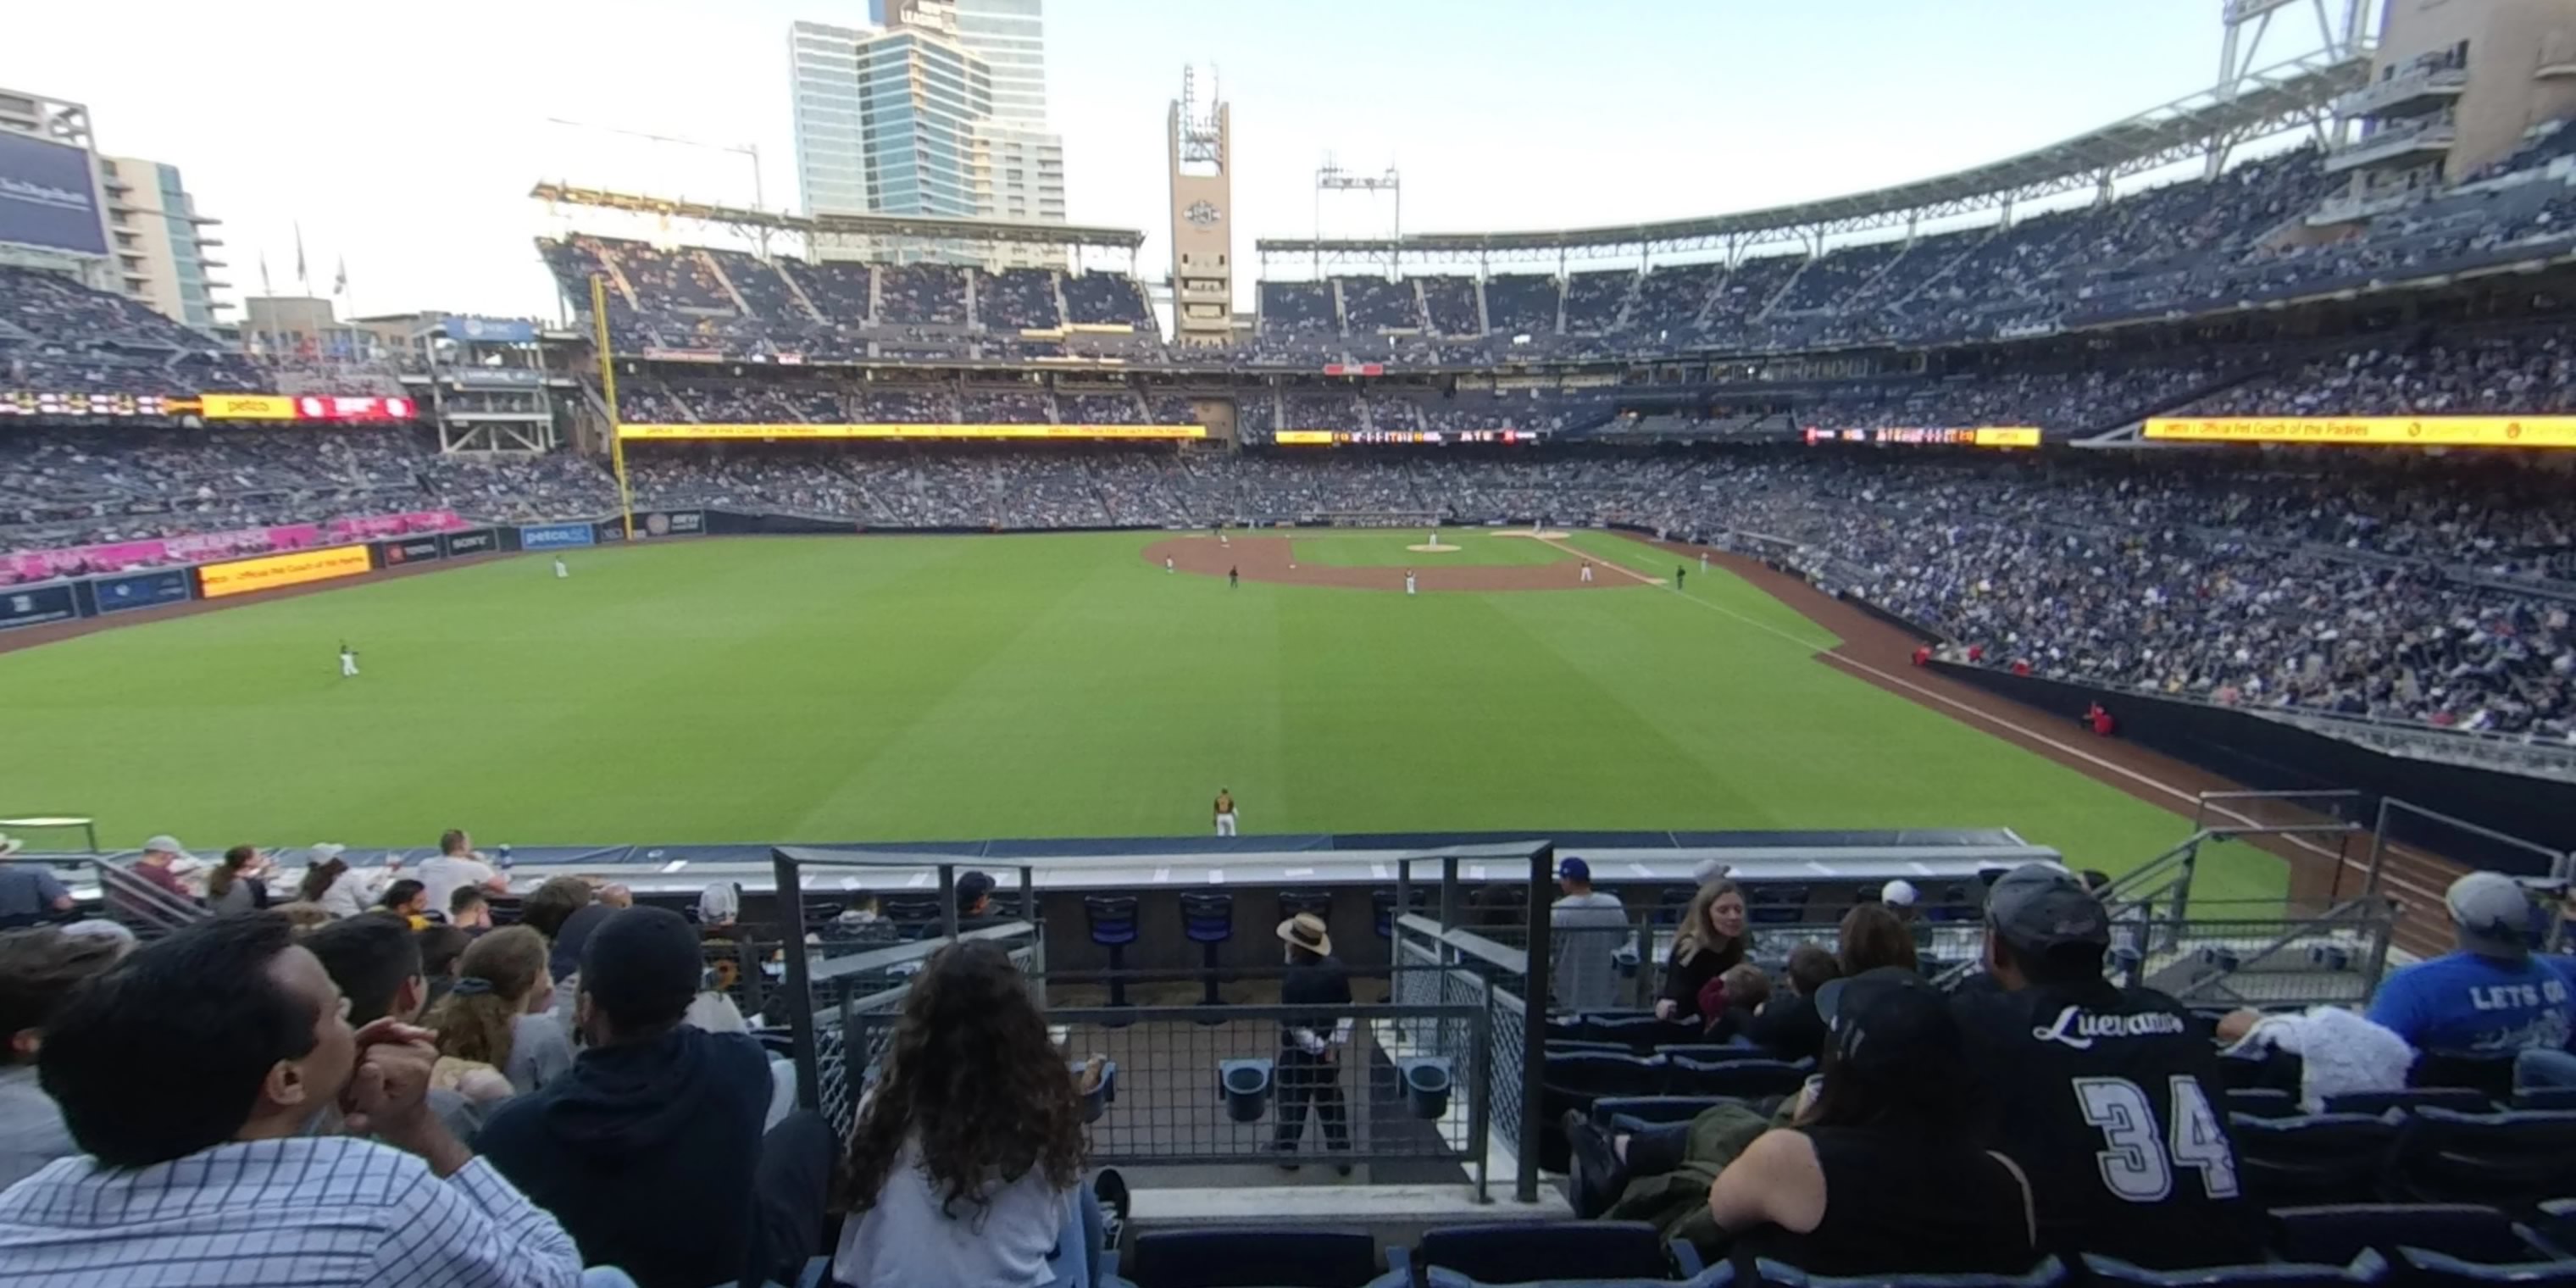 section 226 panoramic seat view  for baseball - petco park